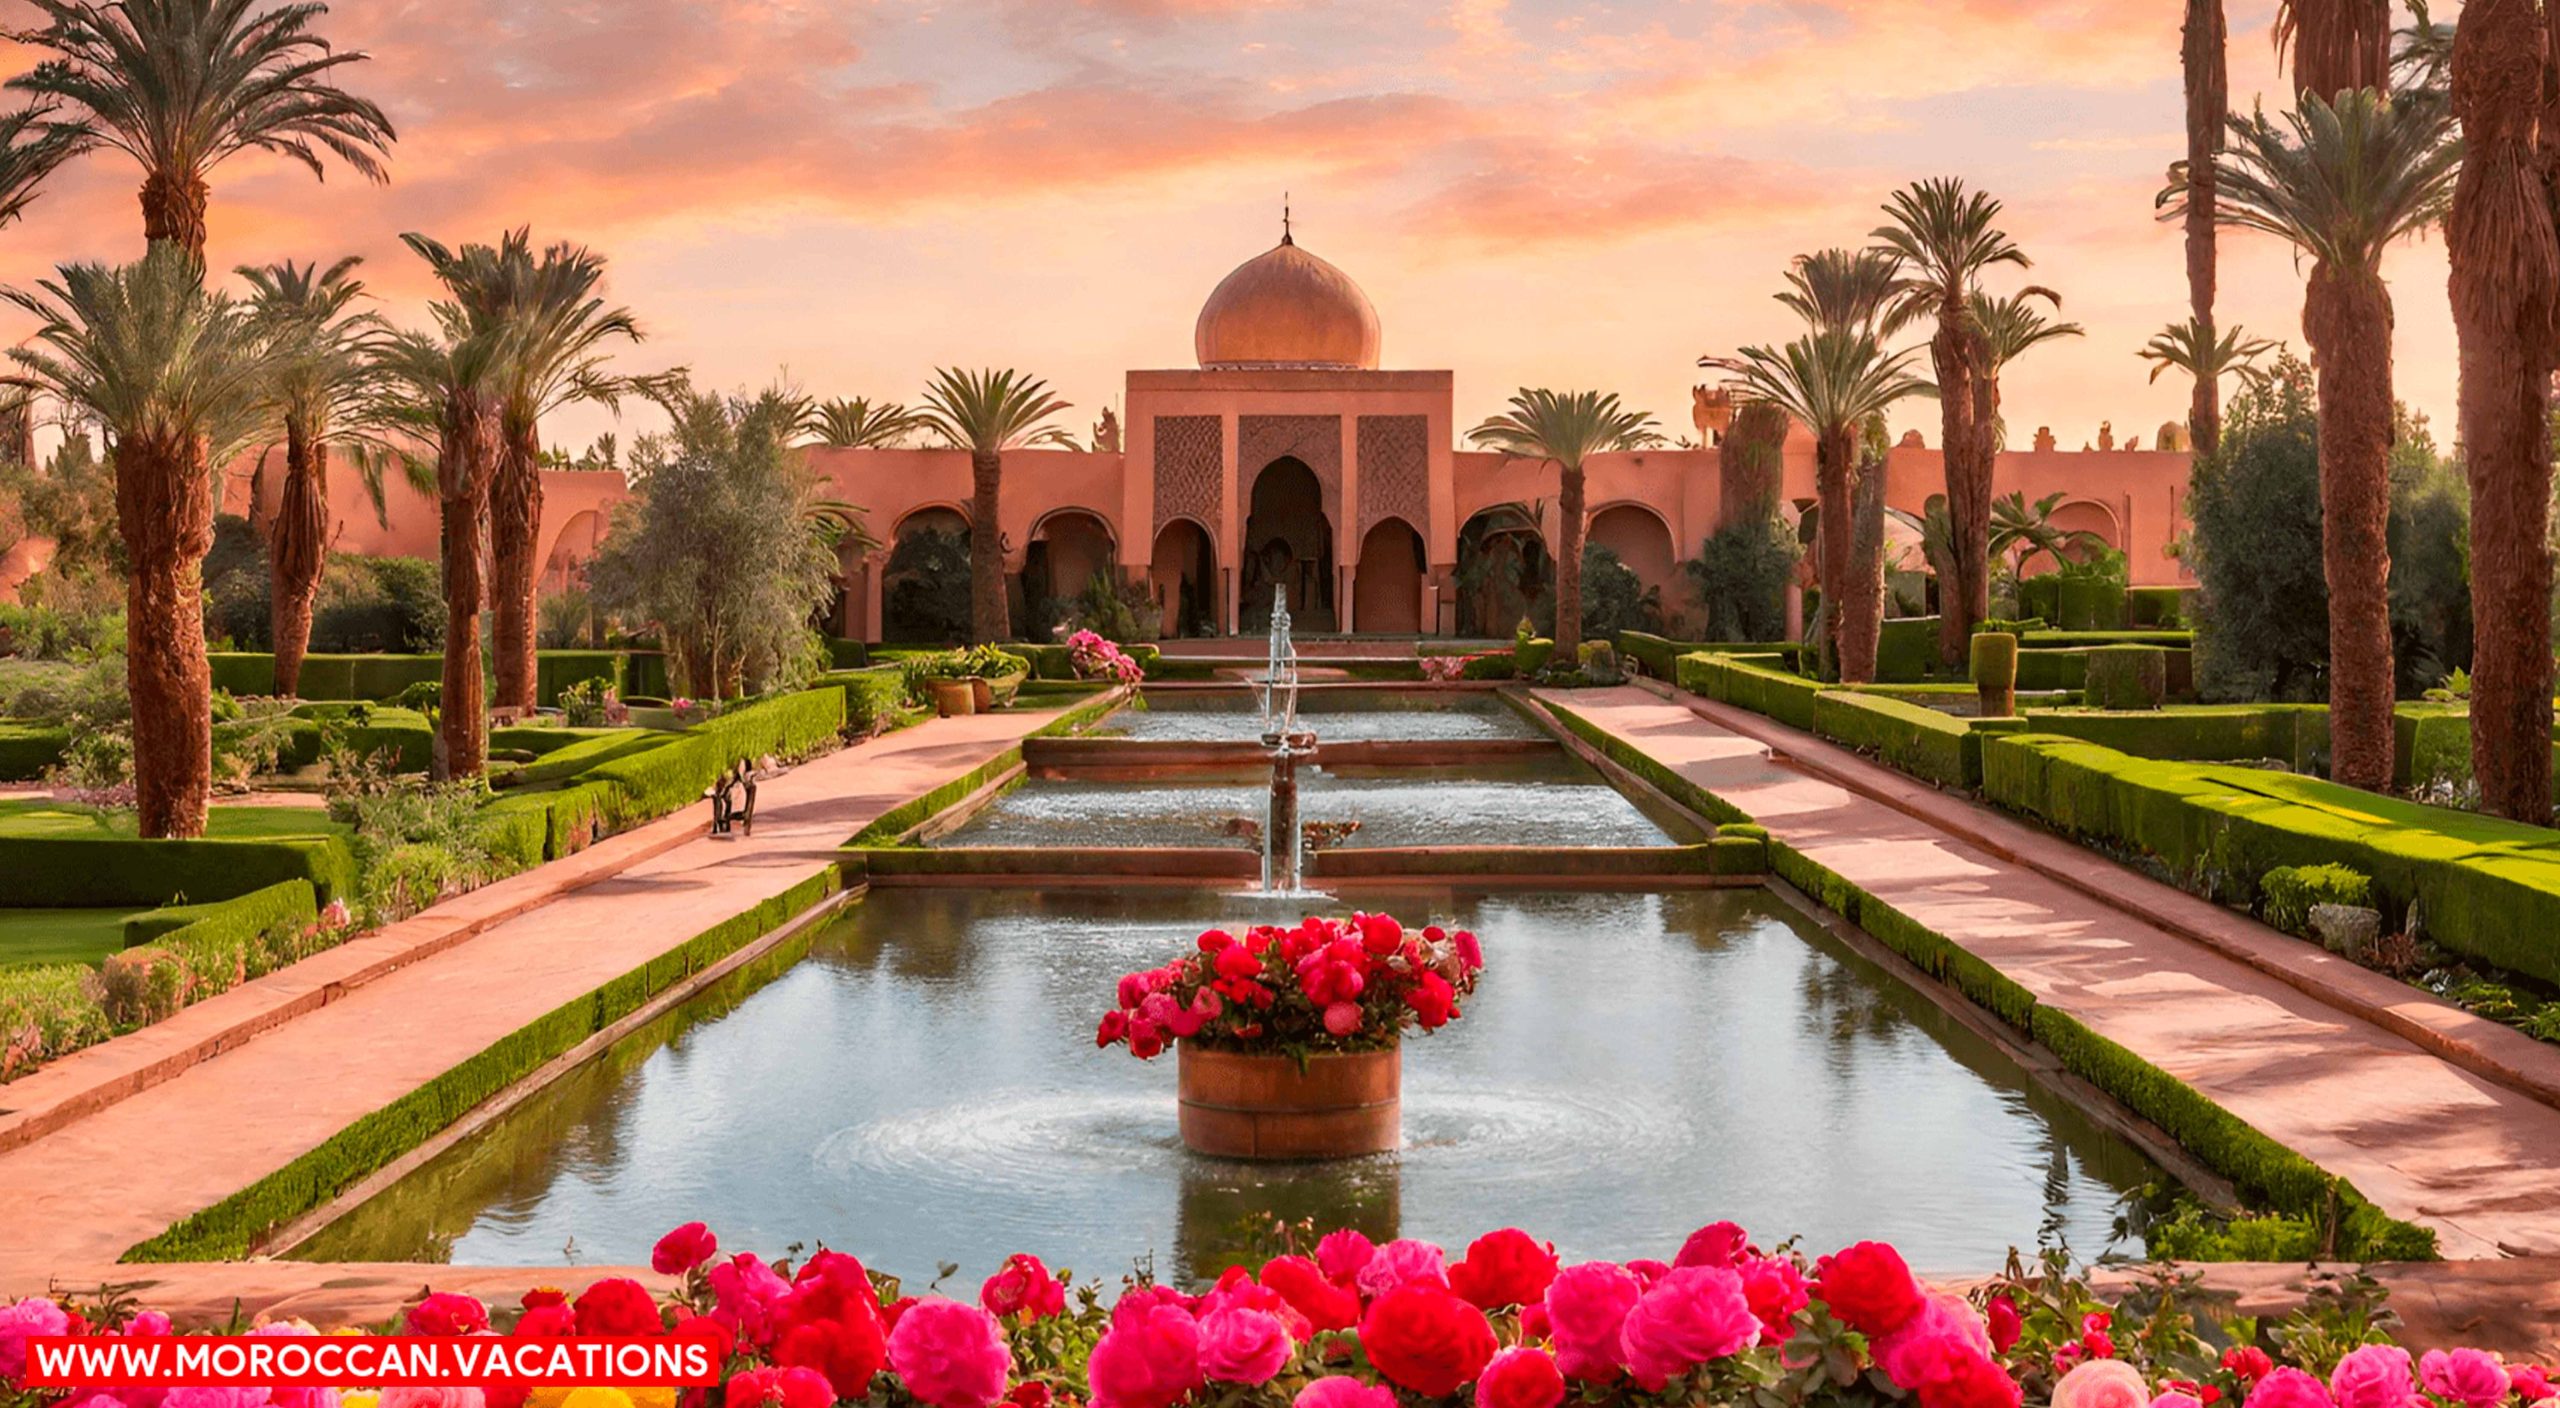 A panoramic shot of blooming rose bushes, towering palm trees, and cascading water channels, harmonizing to create an oasis.